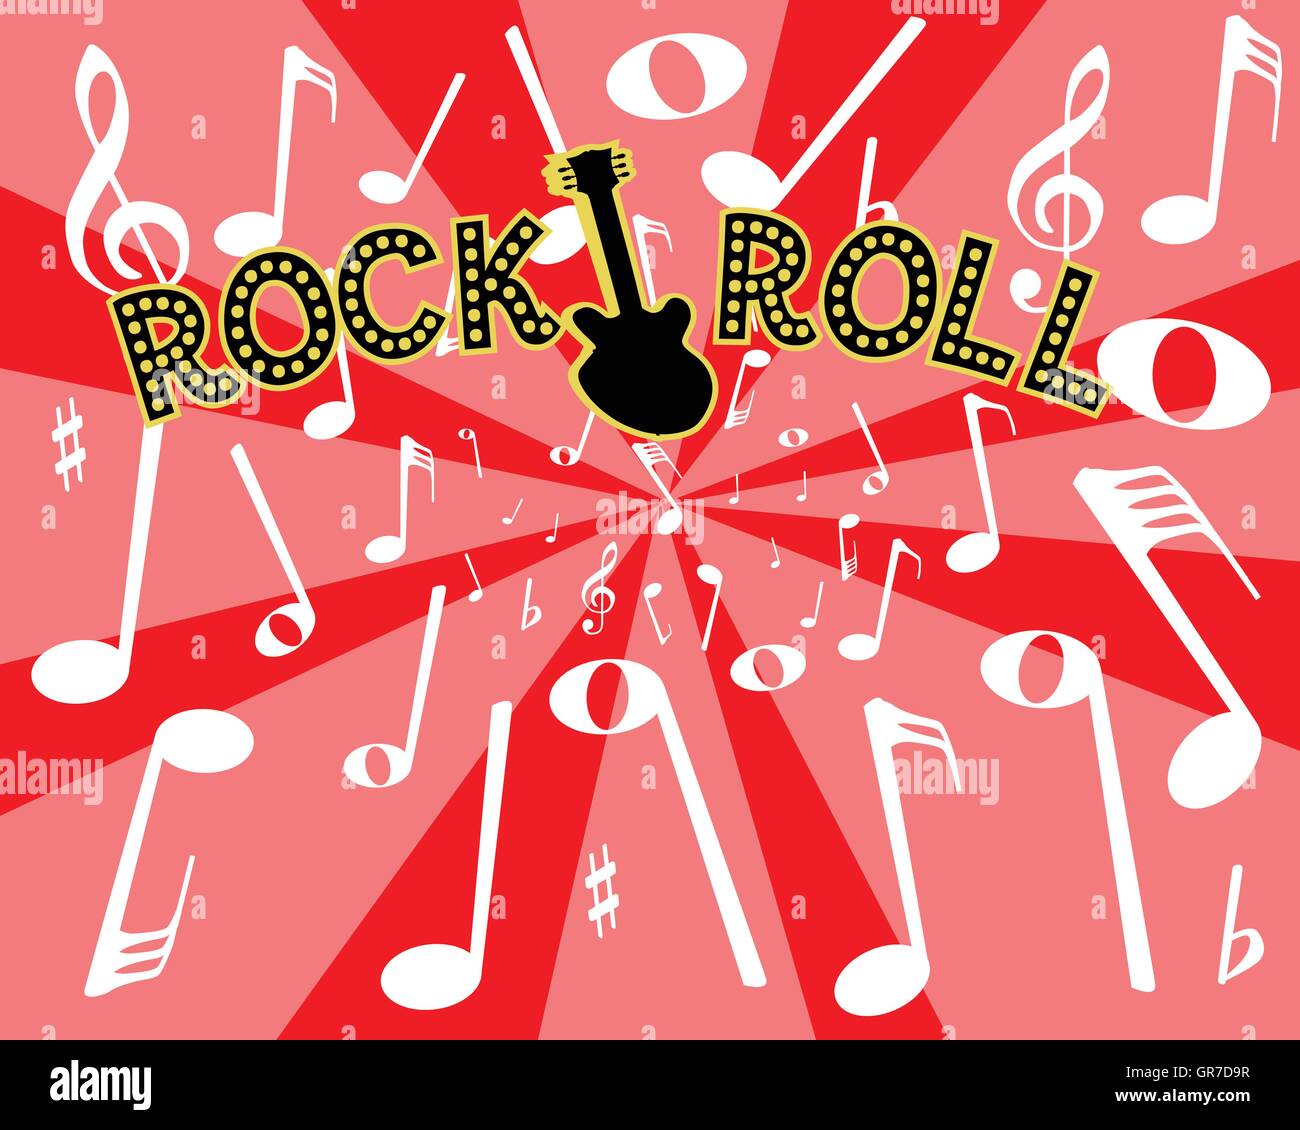 Rock and roll Stock Vector Images - Alamy